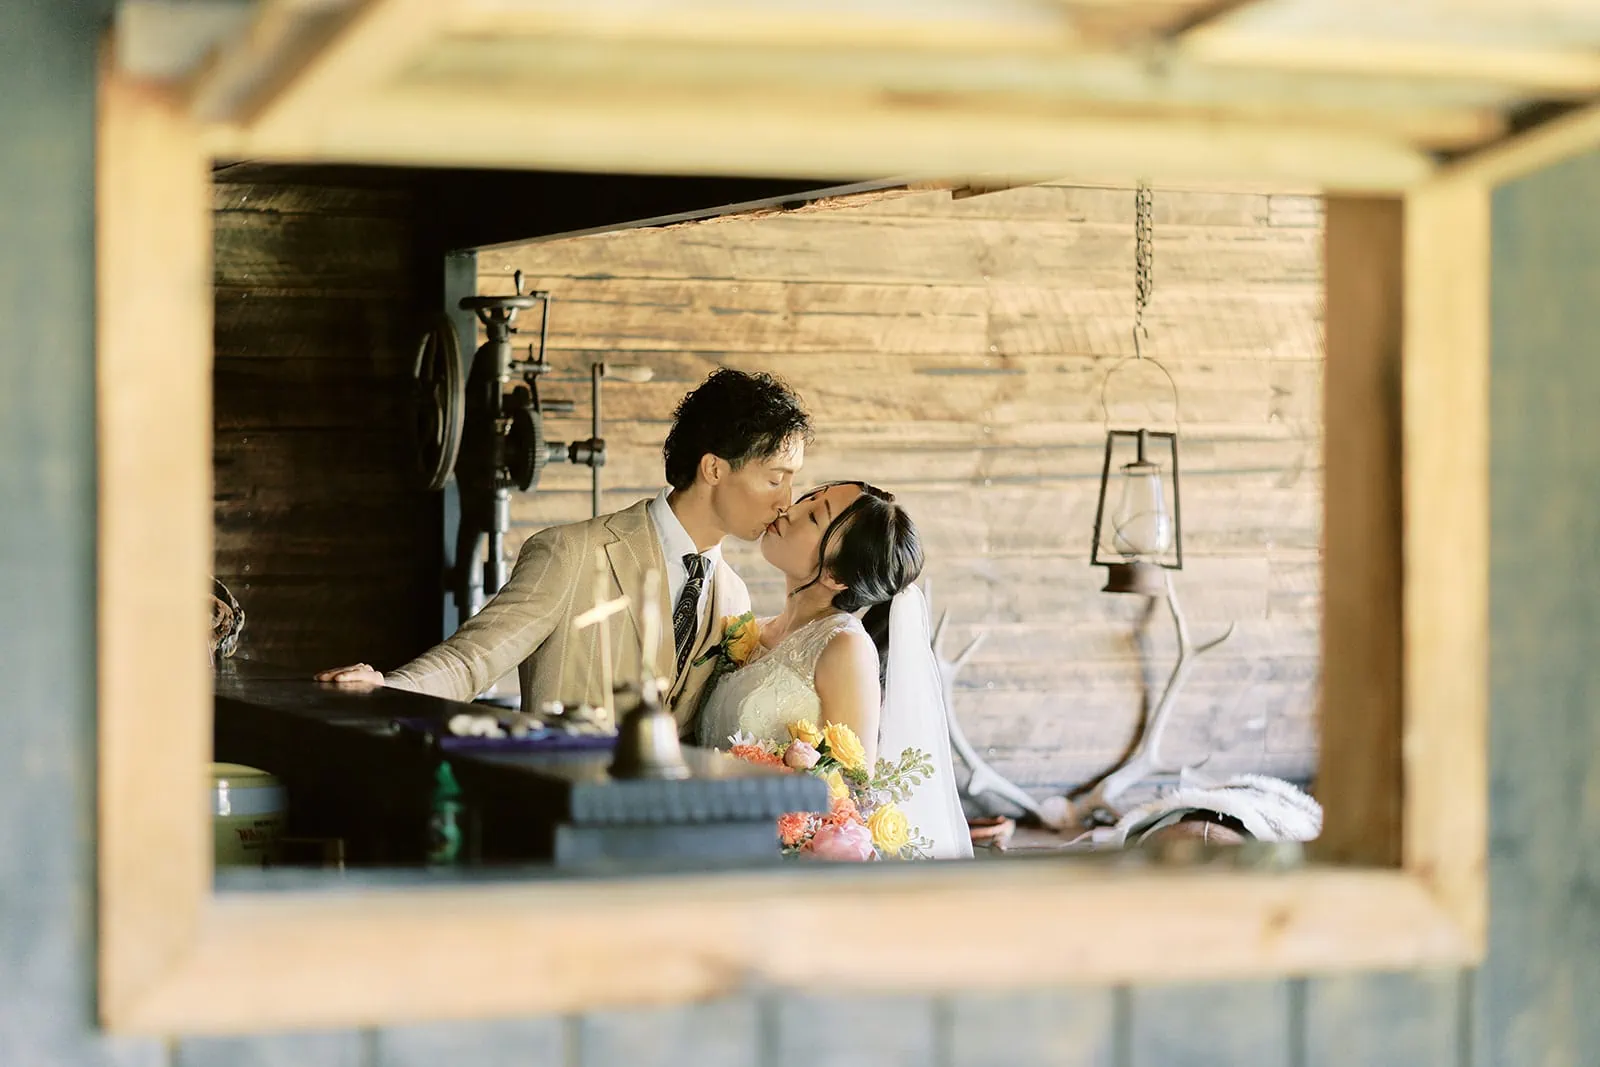 Queenstown Elopement Heli Wedding Photographer クイーンズタウン結婚式 | Saki & Taisei's romantic Queenstown Heli Pre-Wedding Photoshoot captures a heartfelt moment as they share a passionate kiss in front of a mirror.